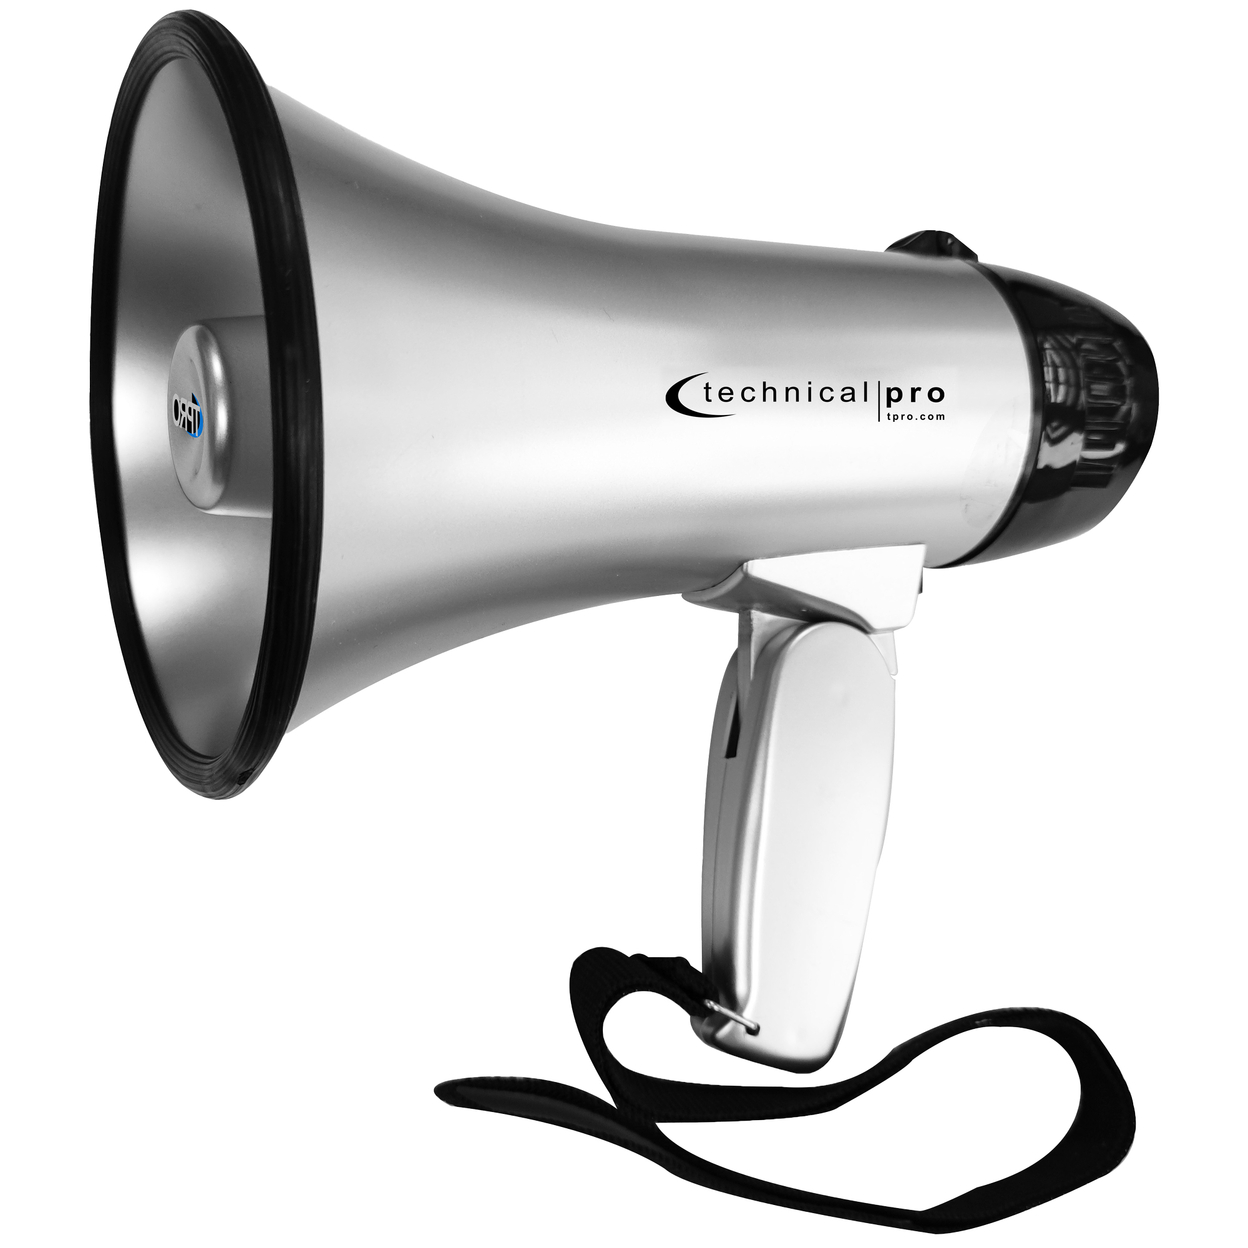 Technical Pro Lightweight Portable 20 Watts Silver And Black 300M Range Megaphone Bullhorn With Strap, Siren, And Volume Control